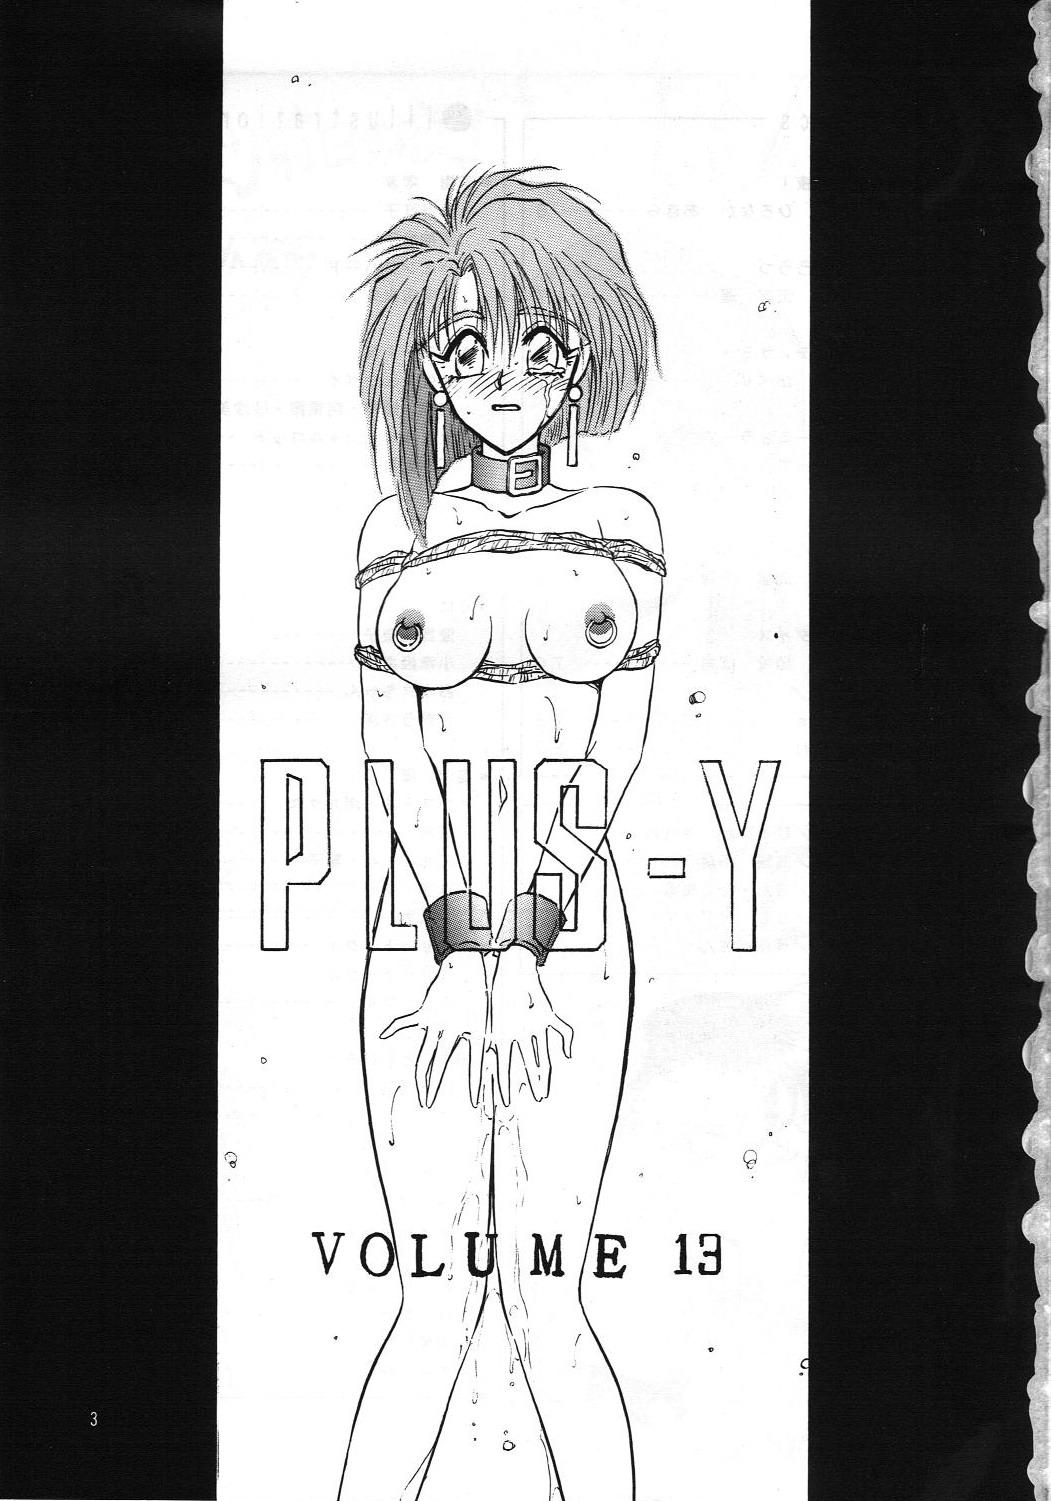 Highschool PLUS-Y Vol.13 - Ah my goddess Tenchi muyo Ghost sweeper mikami Brave express might gaine Future gpx cyber formula Muka muka paradise Gang - Page 2